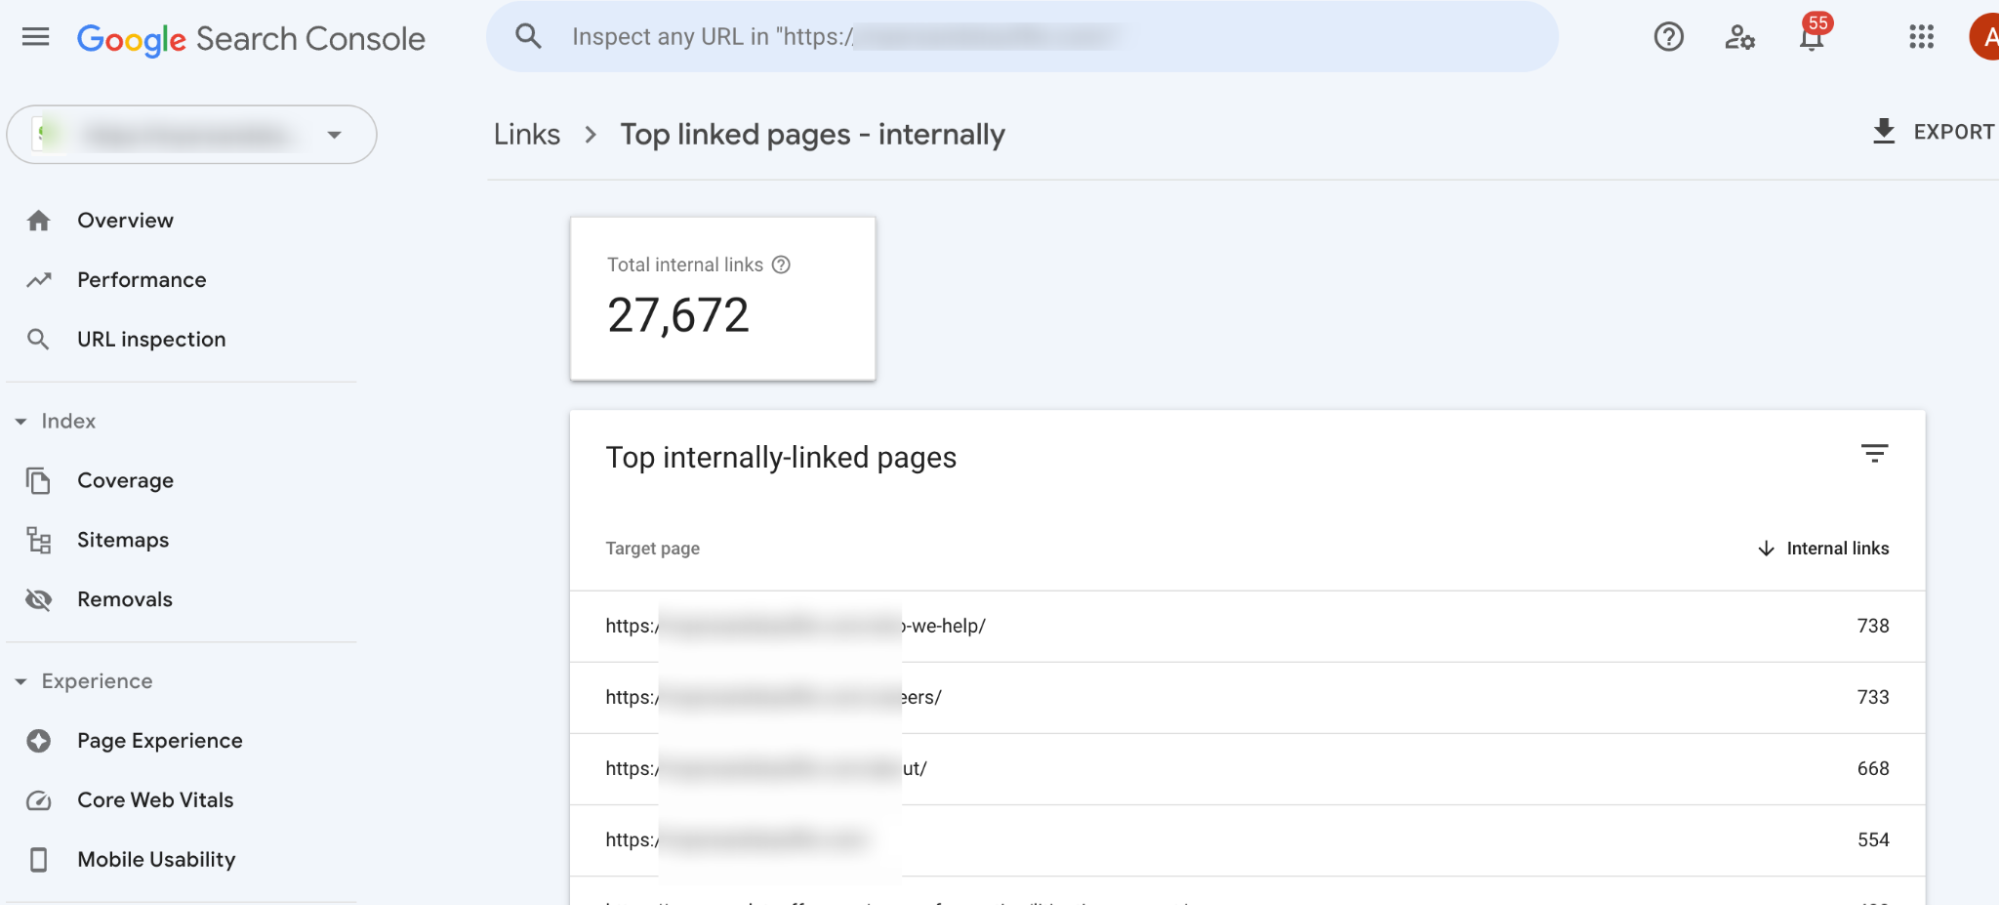 Find Your Top Linked Pages